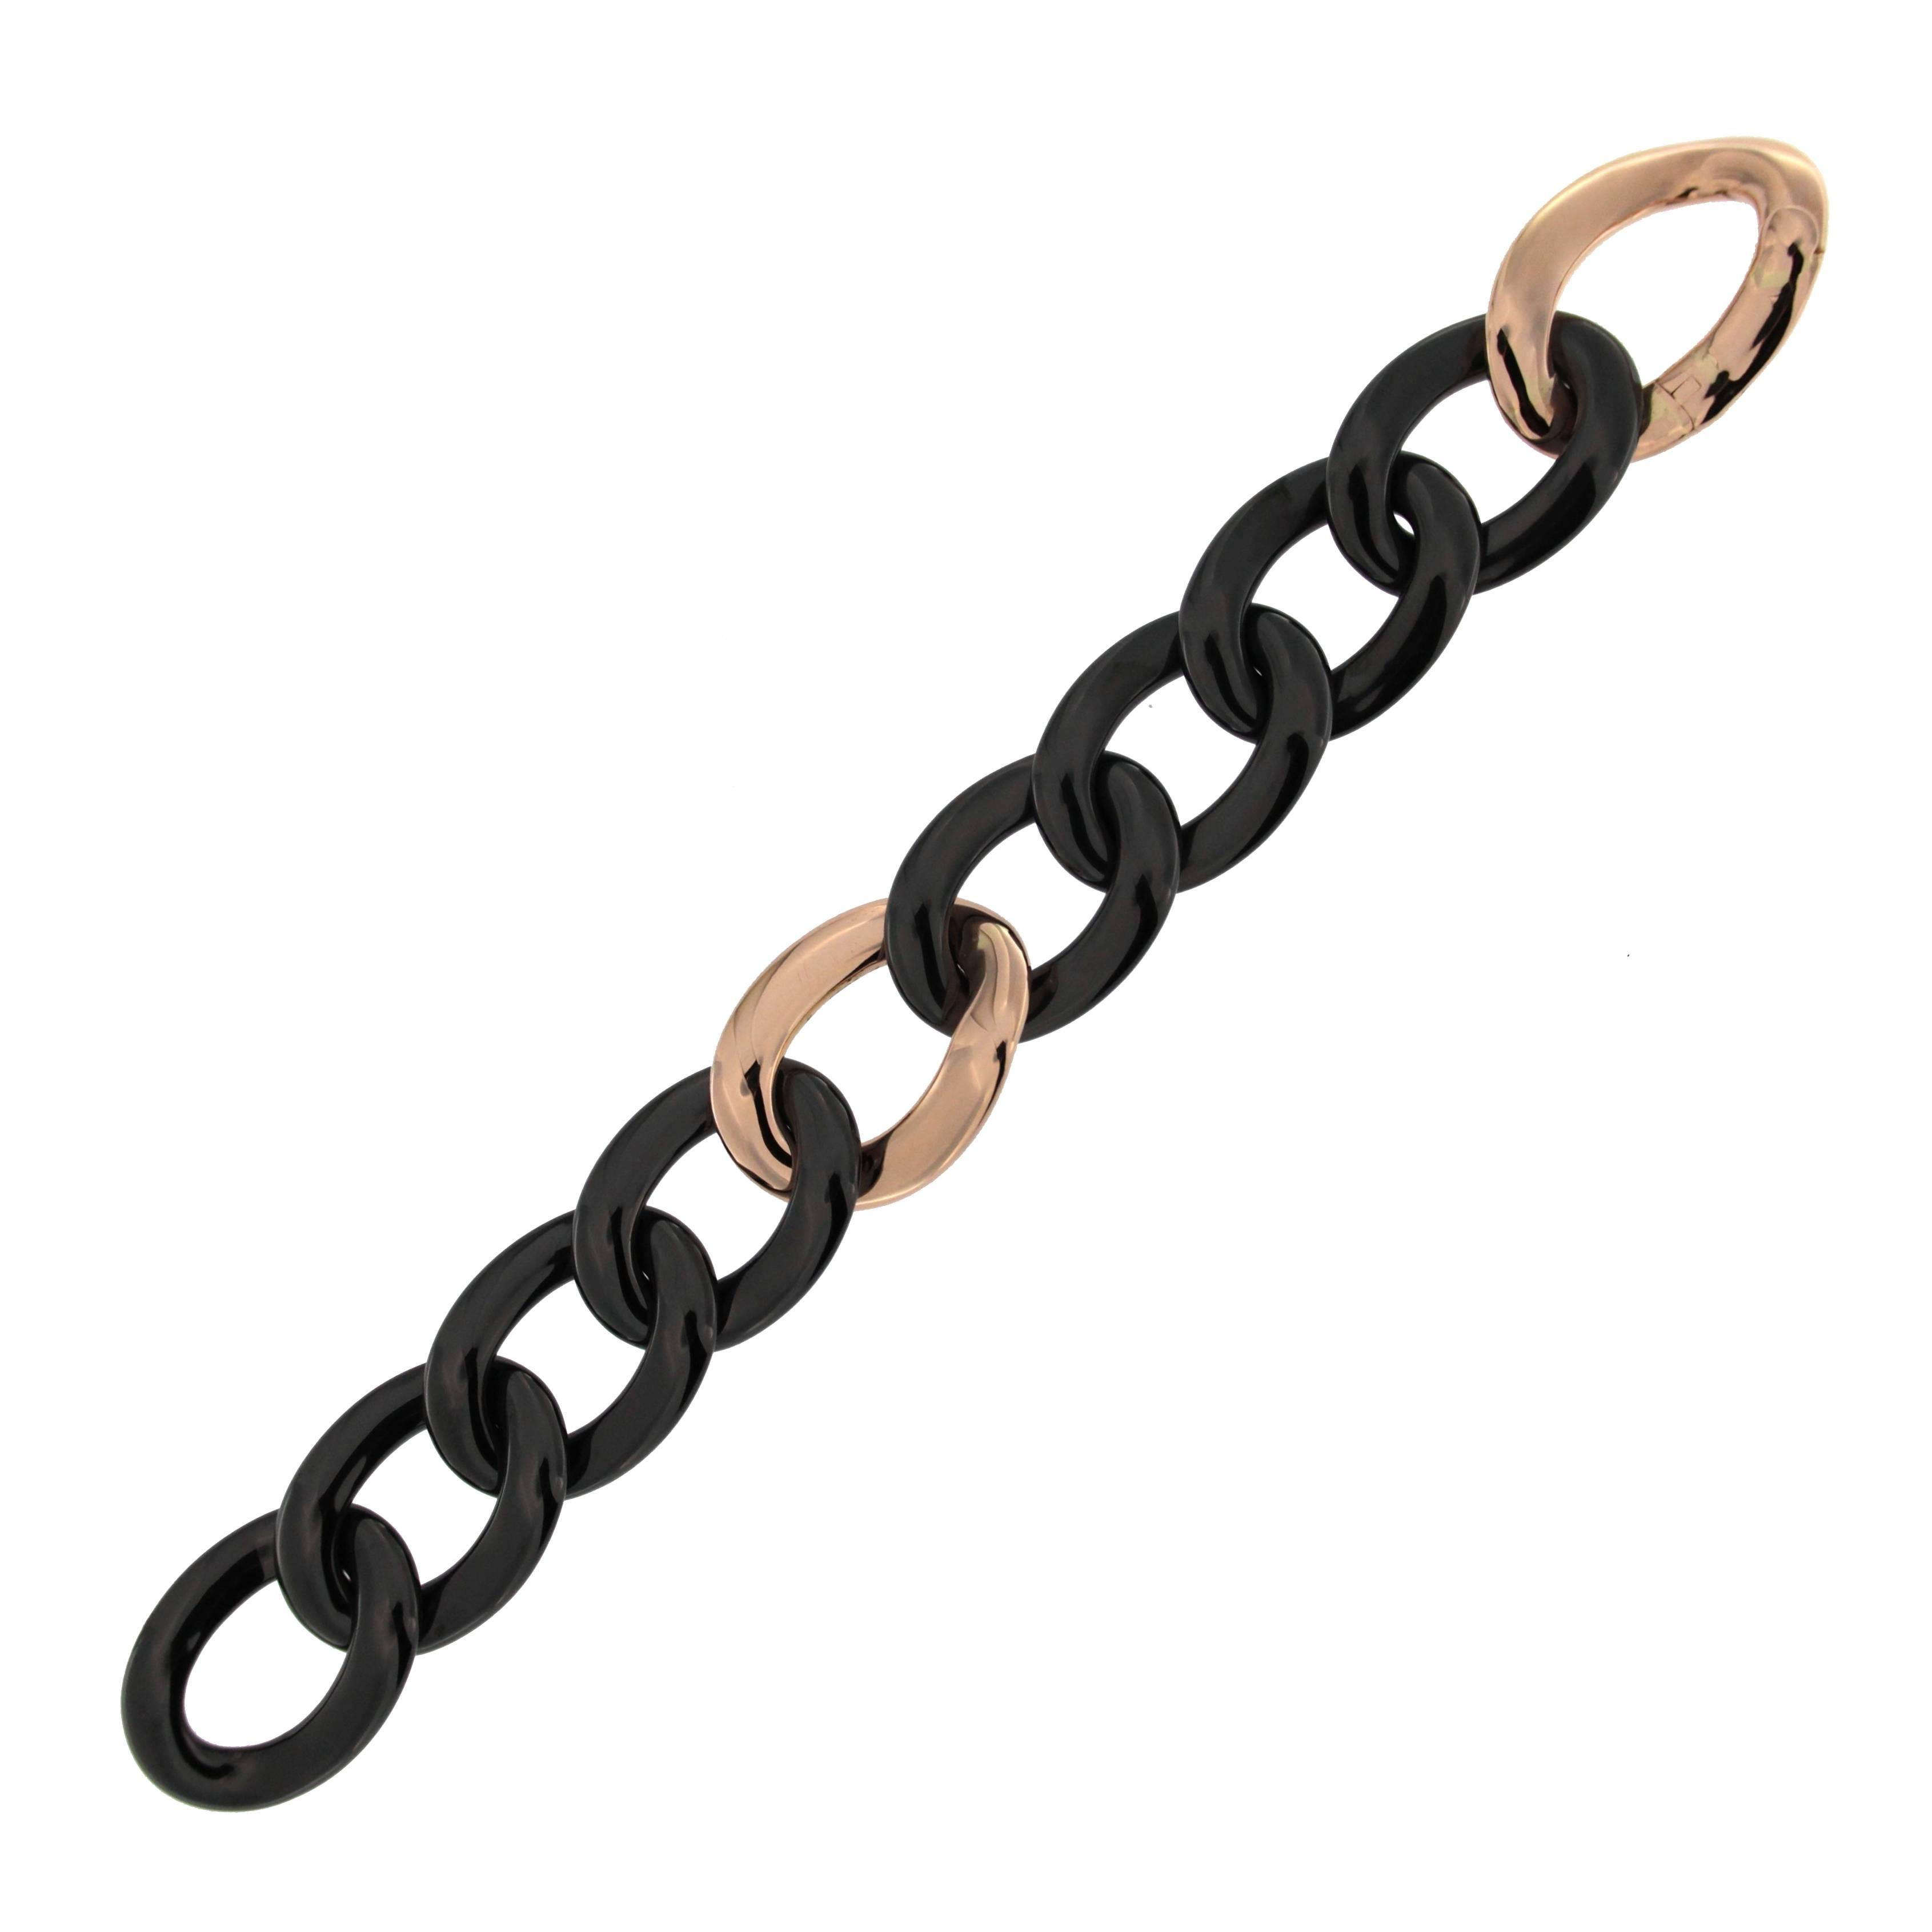 Alex Jona design collection, hand crafted 18k yellow gold and black high-tech
ceramic curb-link bracelet.
Dimensions :  L x 7.28 in, W x 2.5 in - L x 184.9 mm , W x 63.5 in.
With a hardness approaching that of diamond, high-tech ceramic is a